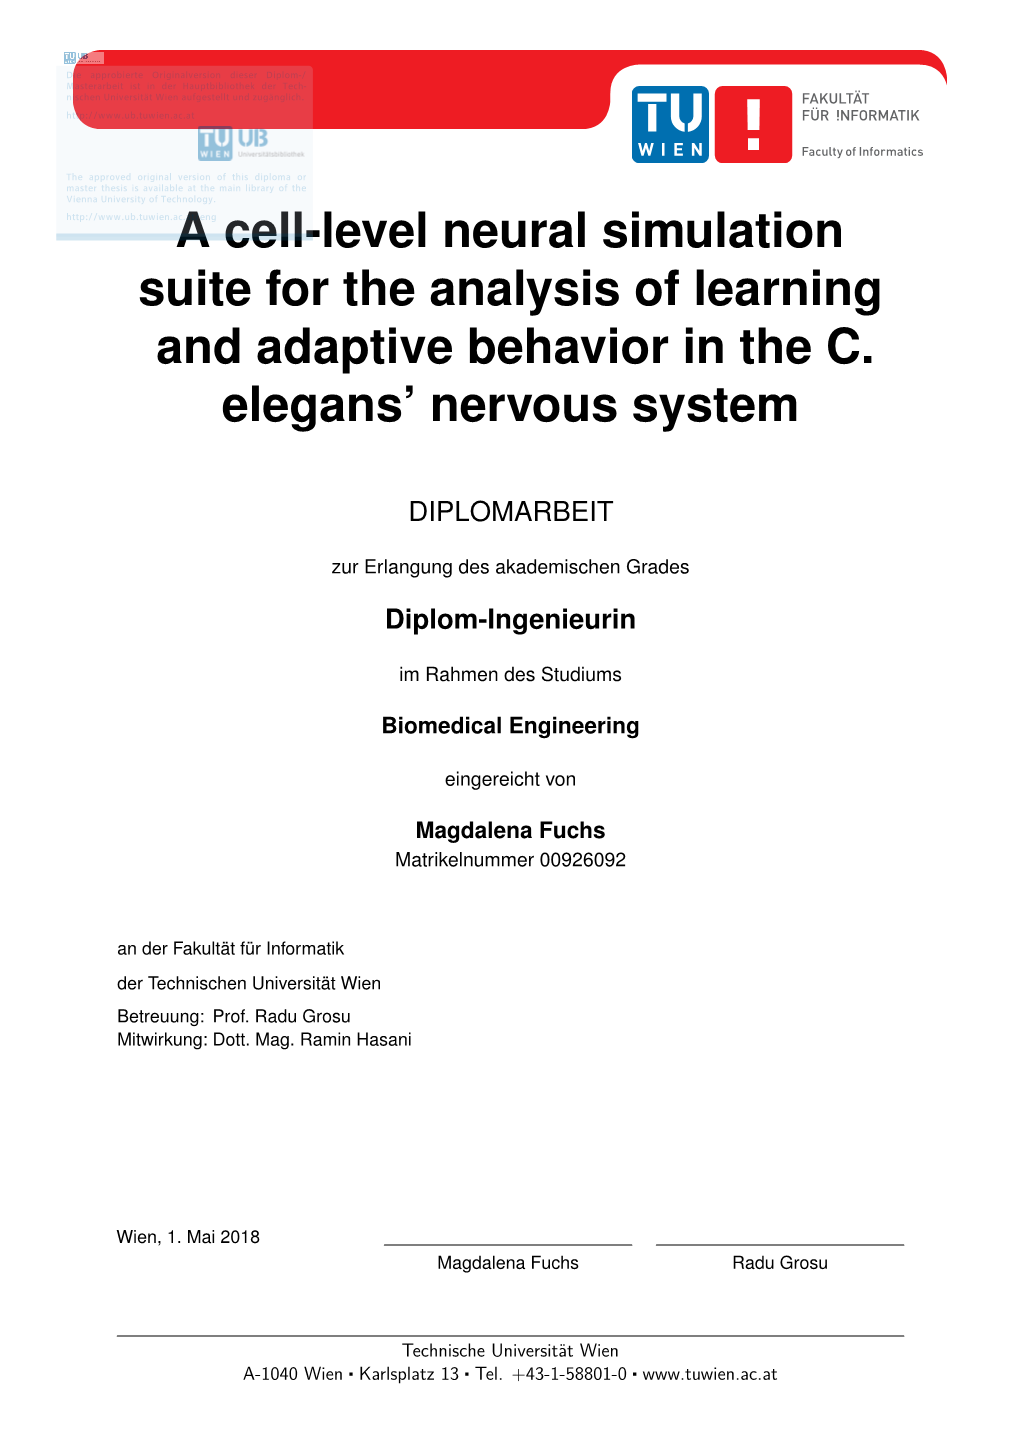 A Cell-Level Neural Simulation Suite for the Analysis of Learning and Adaptive Behavior in the C